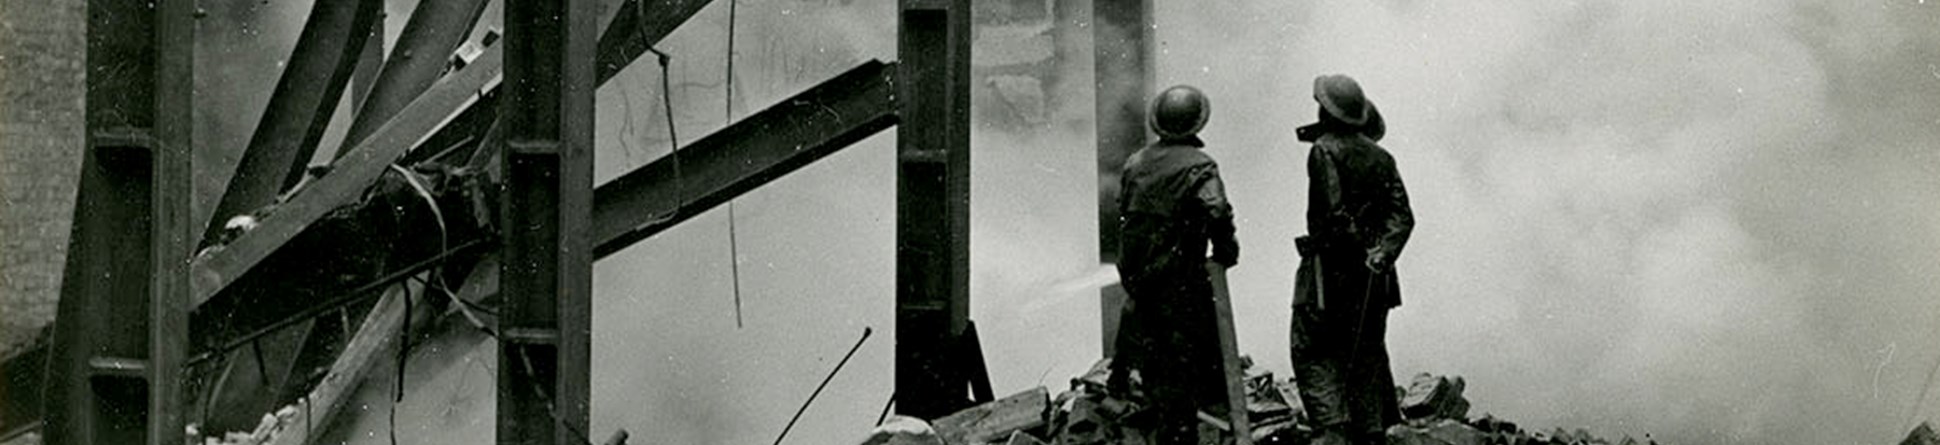 Two fire fighters stand on a pile of rubble next to steel girders looking up at a bomb damaged building partially shrouded by smoke.